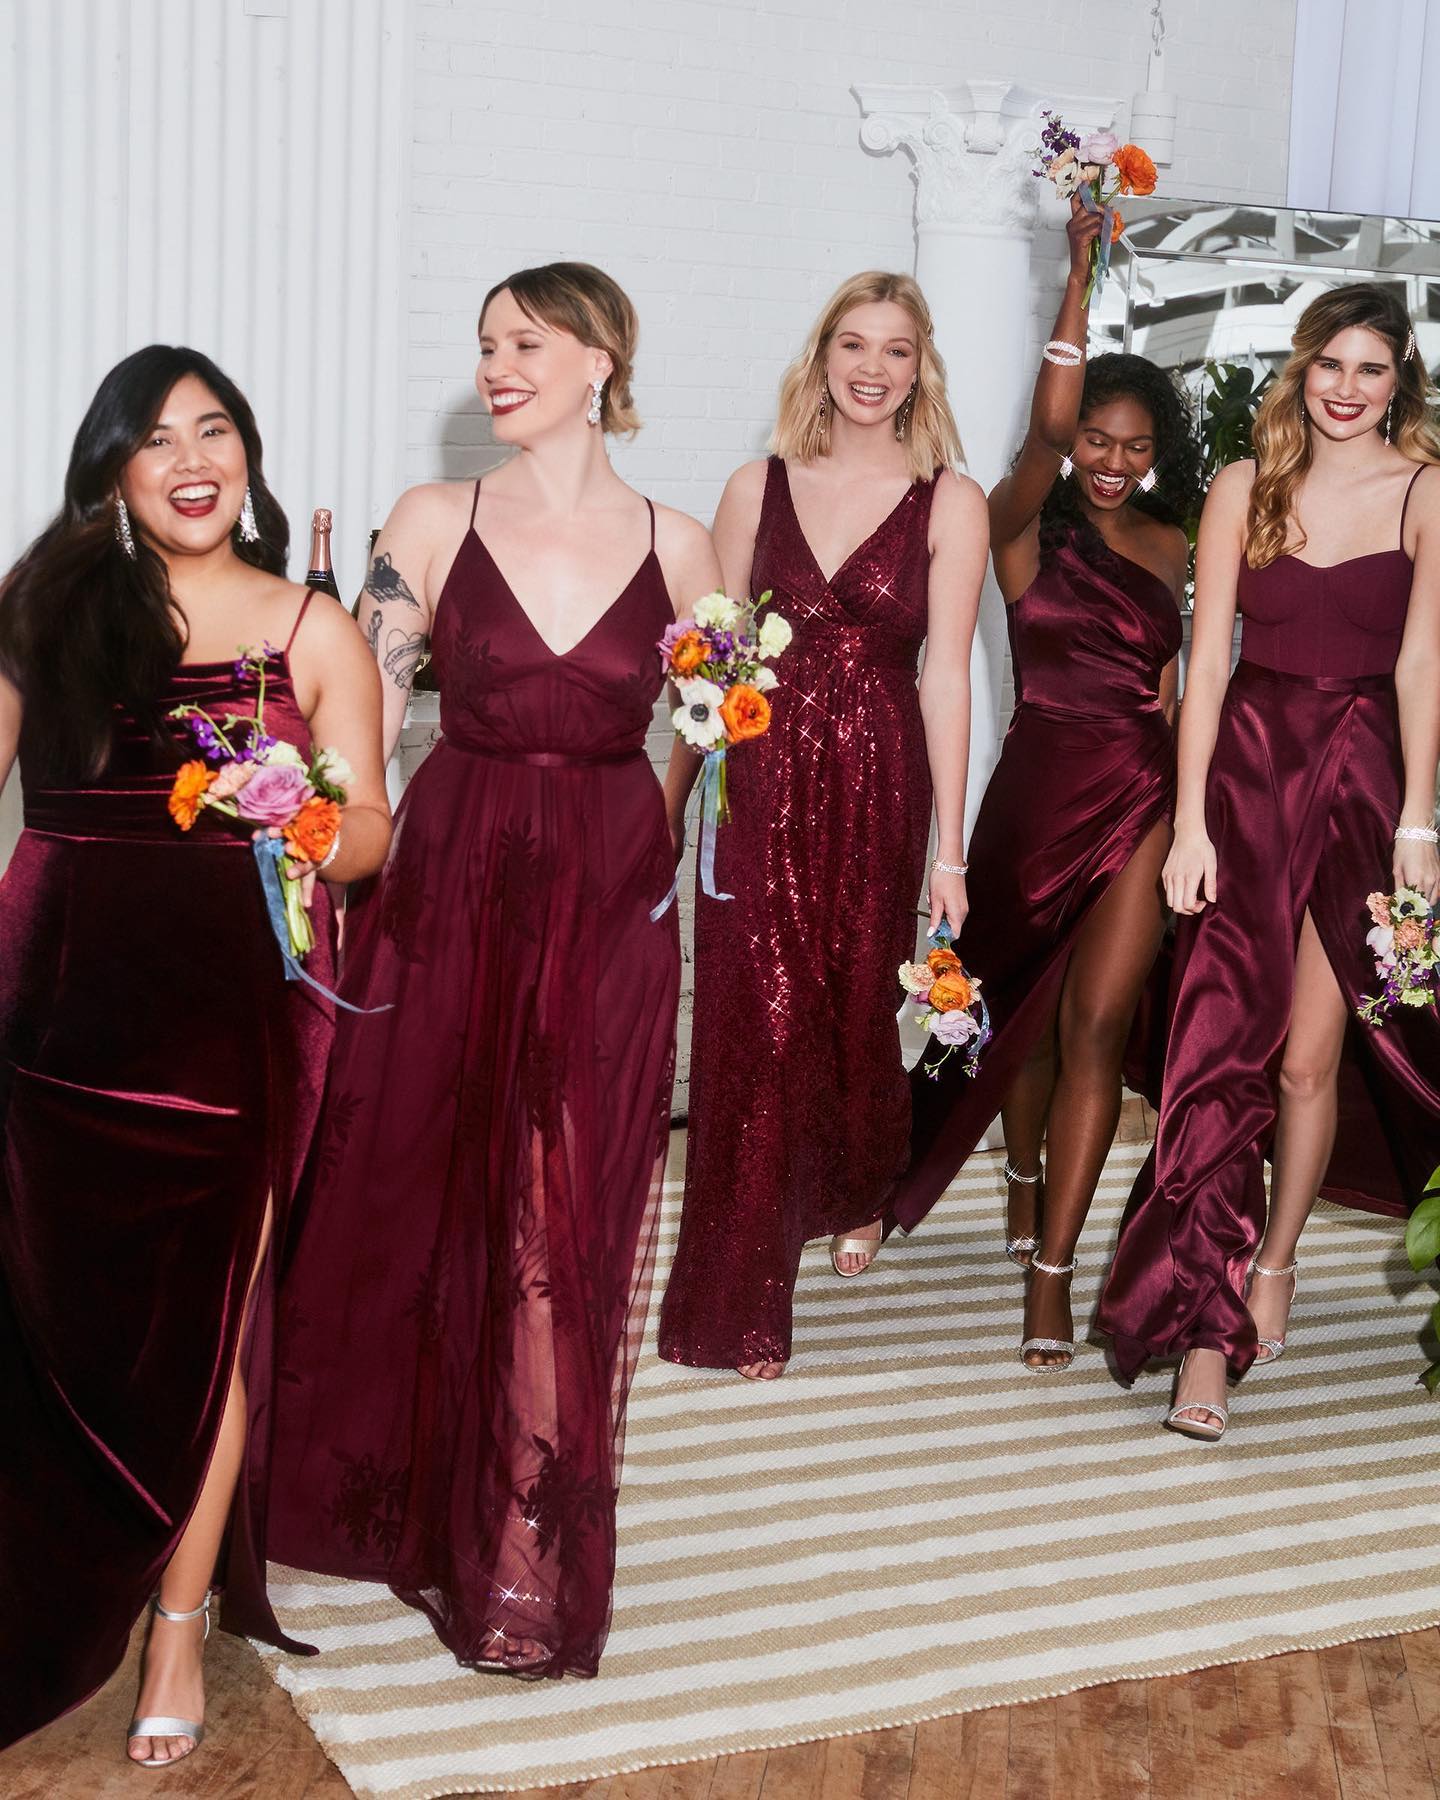 holiday wedding party in red bridesmaid dresses